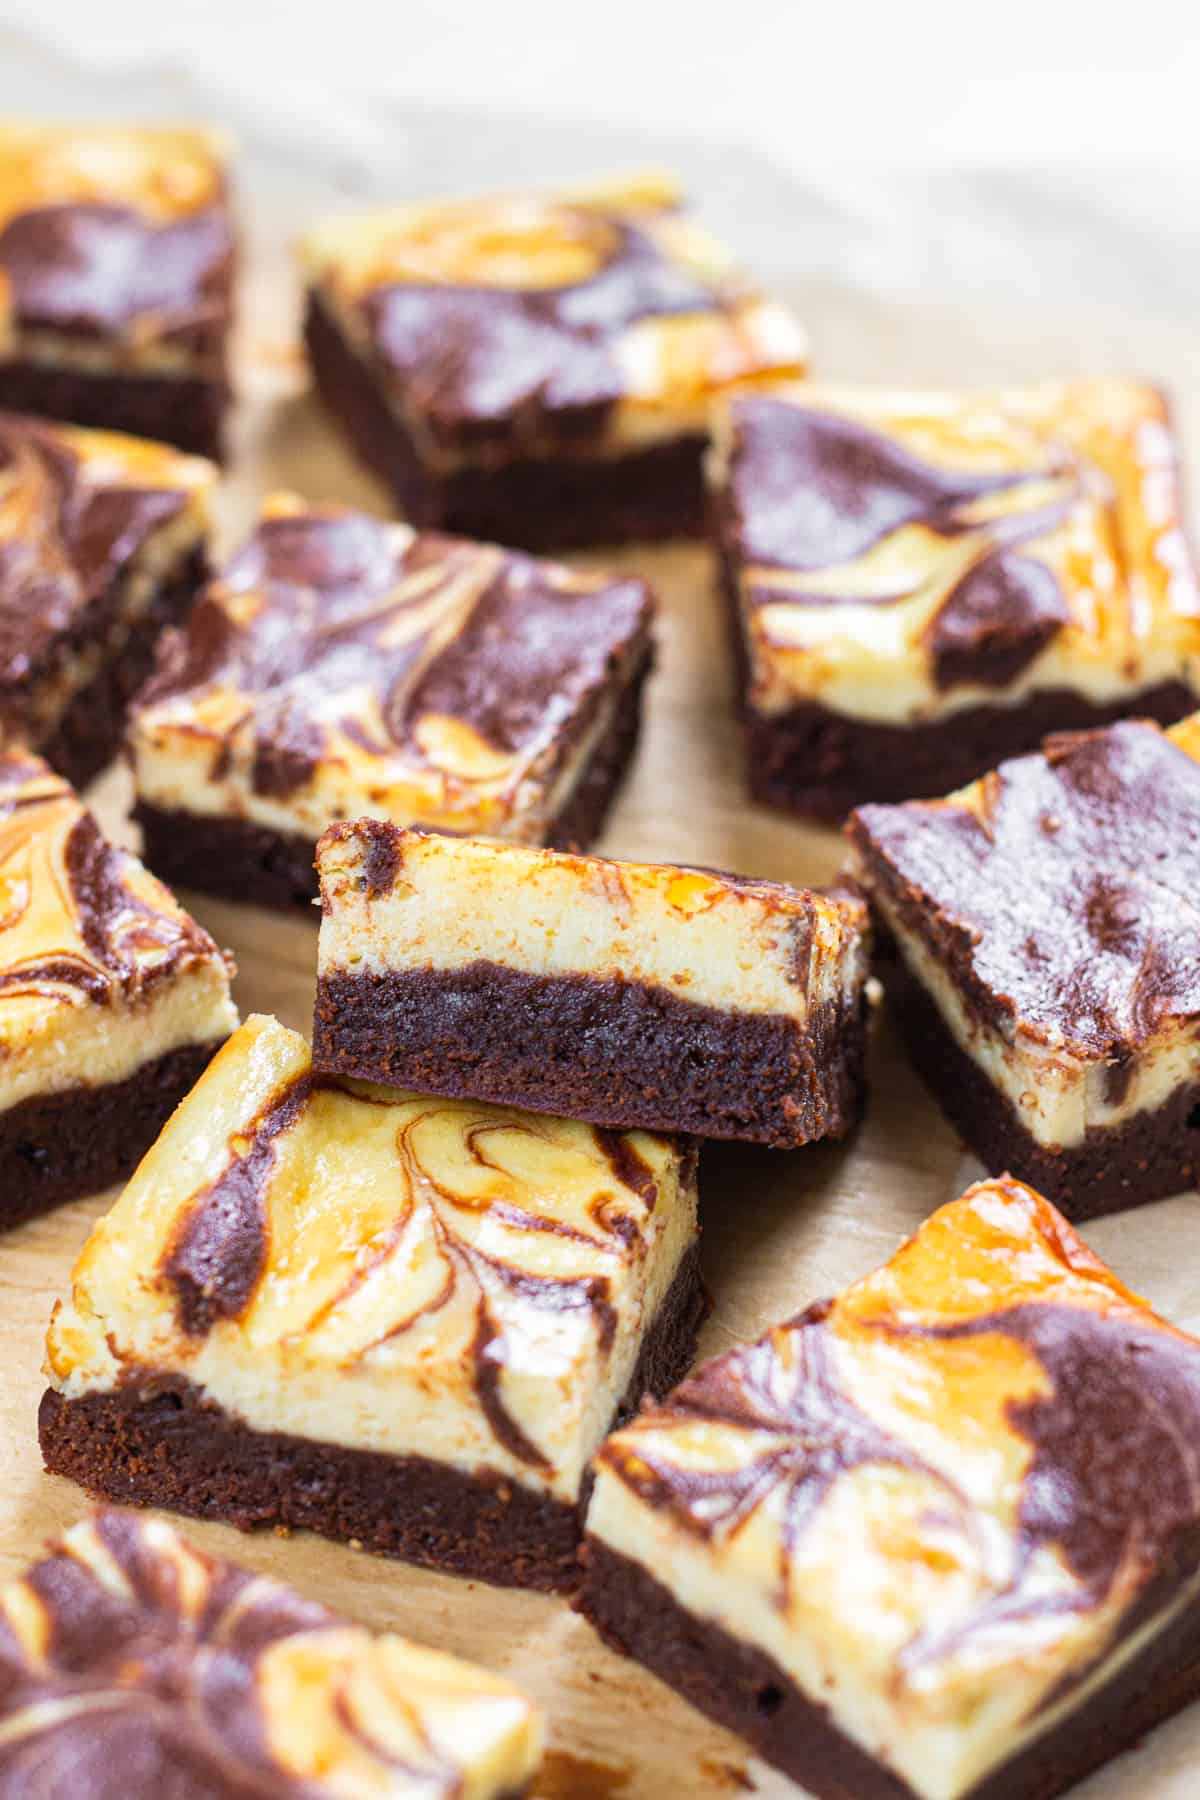 Cheesecake brownies, cut in small squares, laying on a parchment paper.